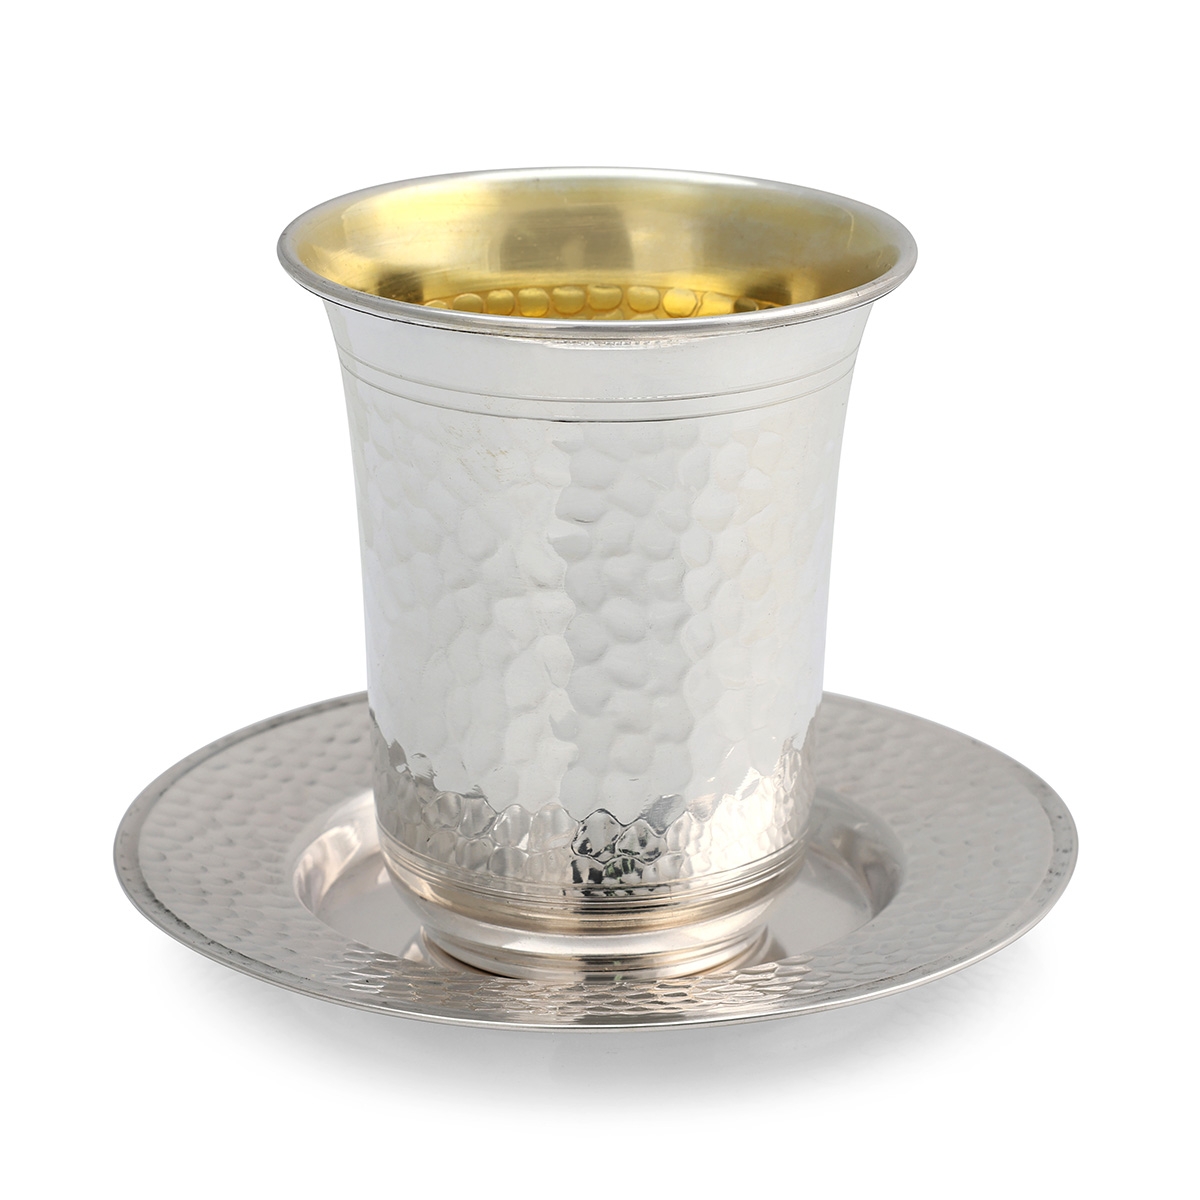 Handcrafted Sterling Silver Hammered Kiddush Cup With Lip By Traditional Yemenite Art - 1